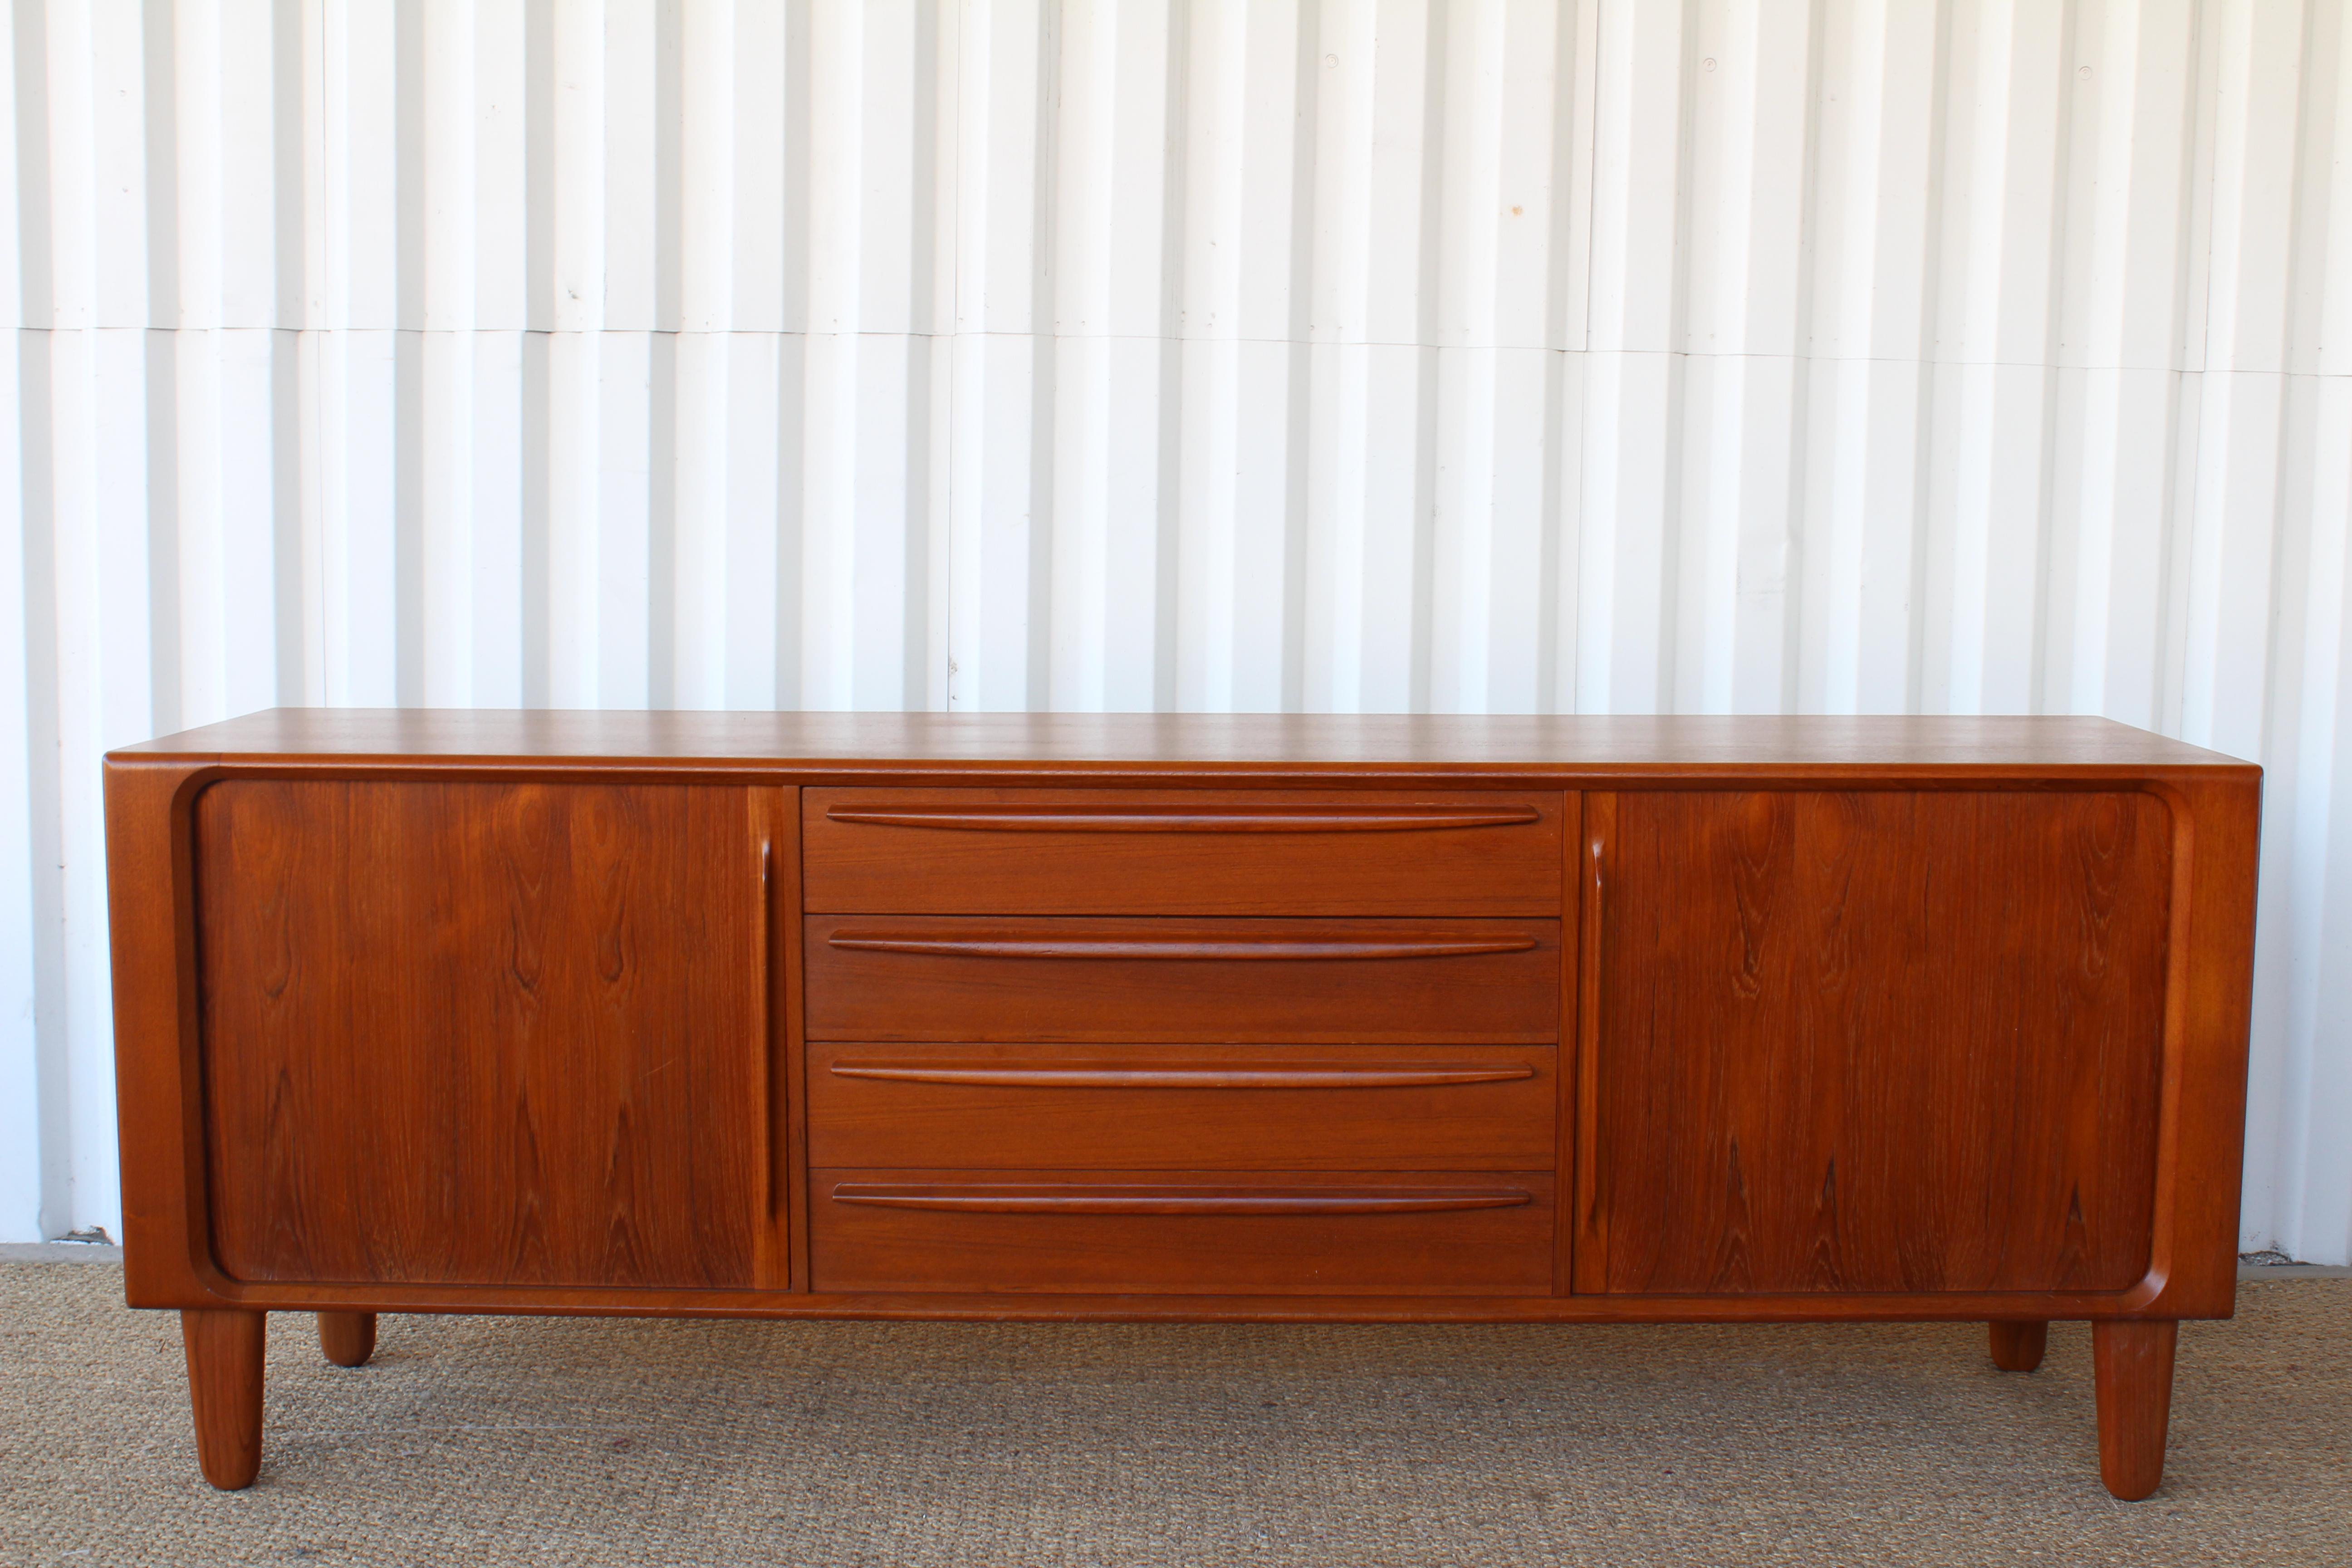 Danish modern solid teak dresser or credenza by Bernhard Pederson & Son from the 1960s. In excellent condition and recently refinished. Exceptional craftsmanship throughout. Features tambour sliding doors, dovetailed drawers, sculpted teak handles